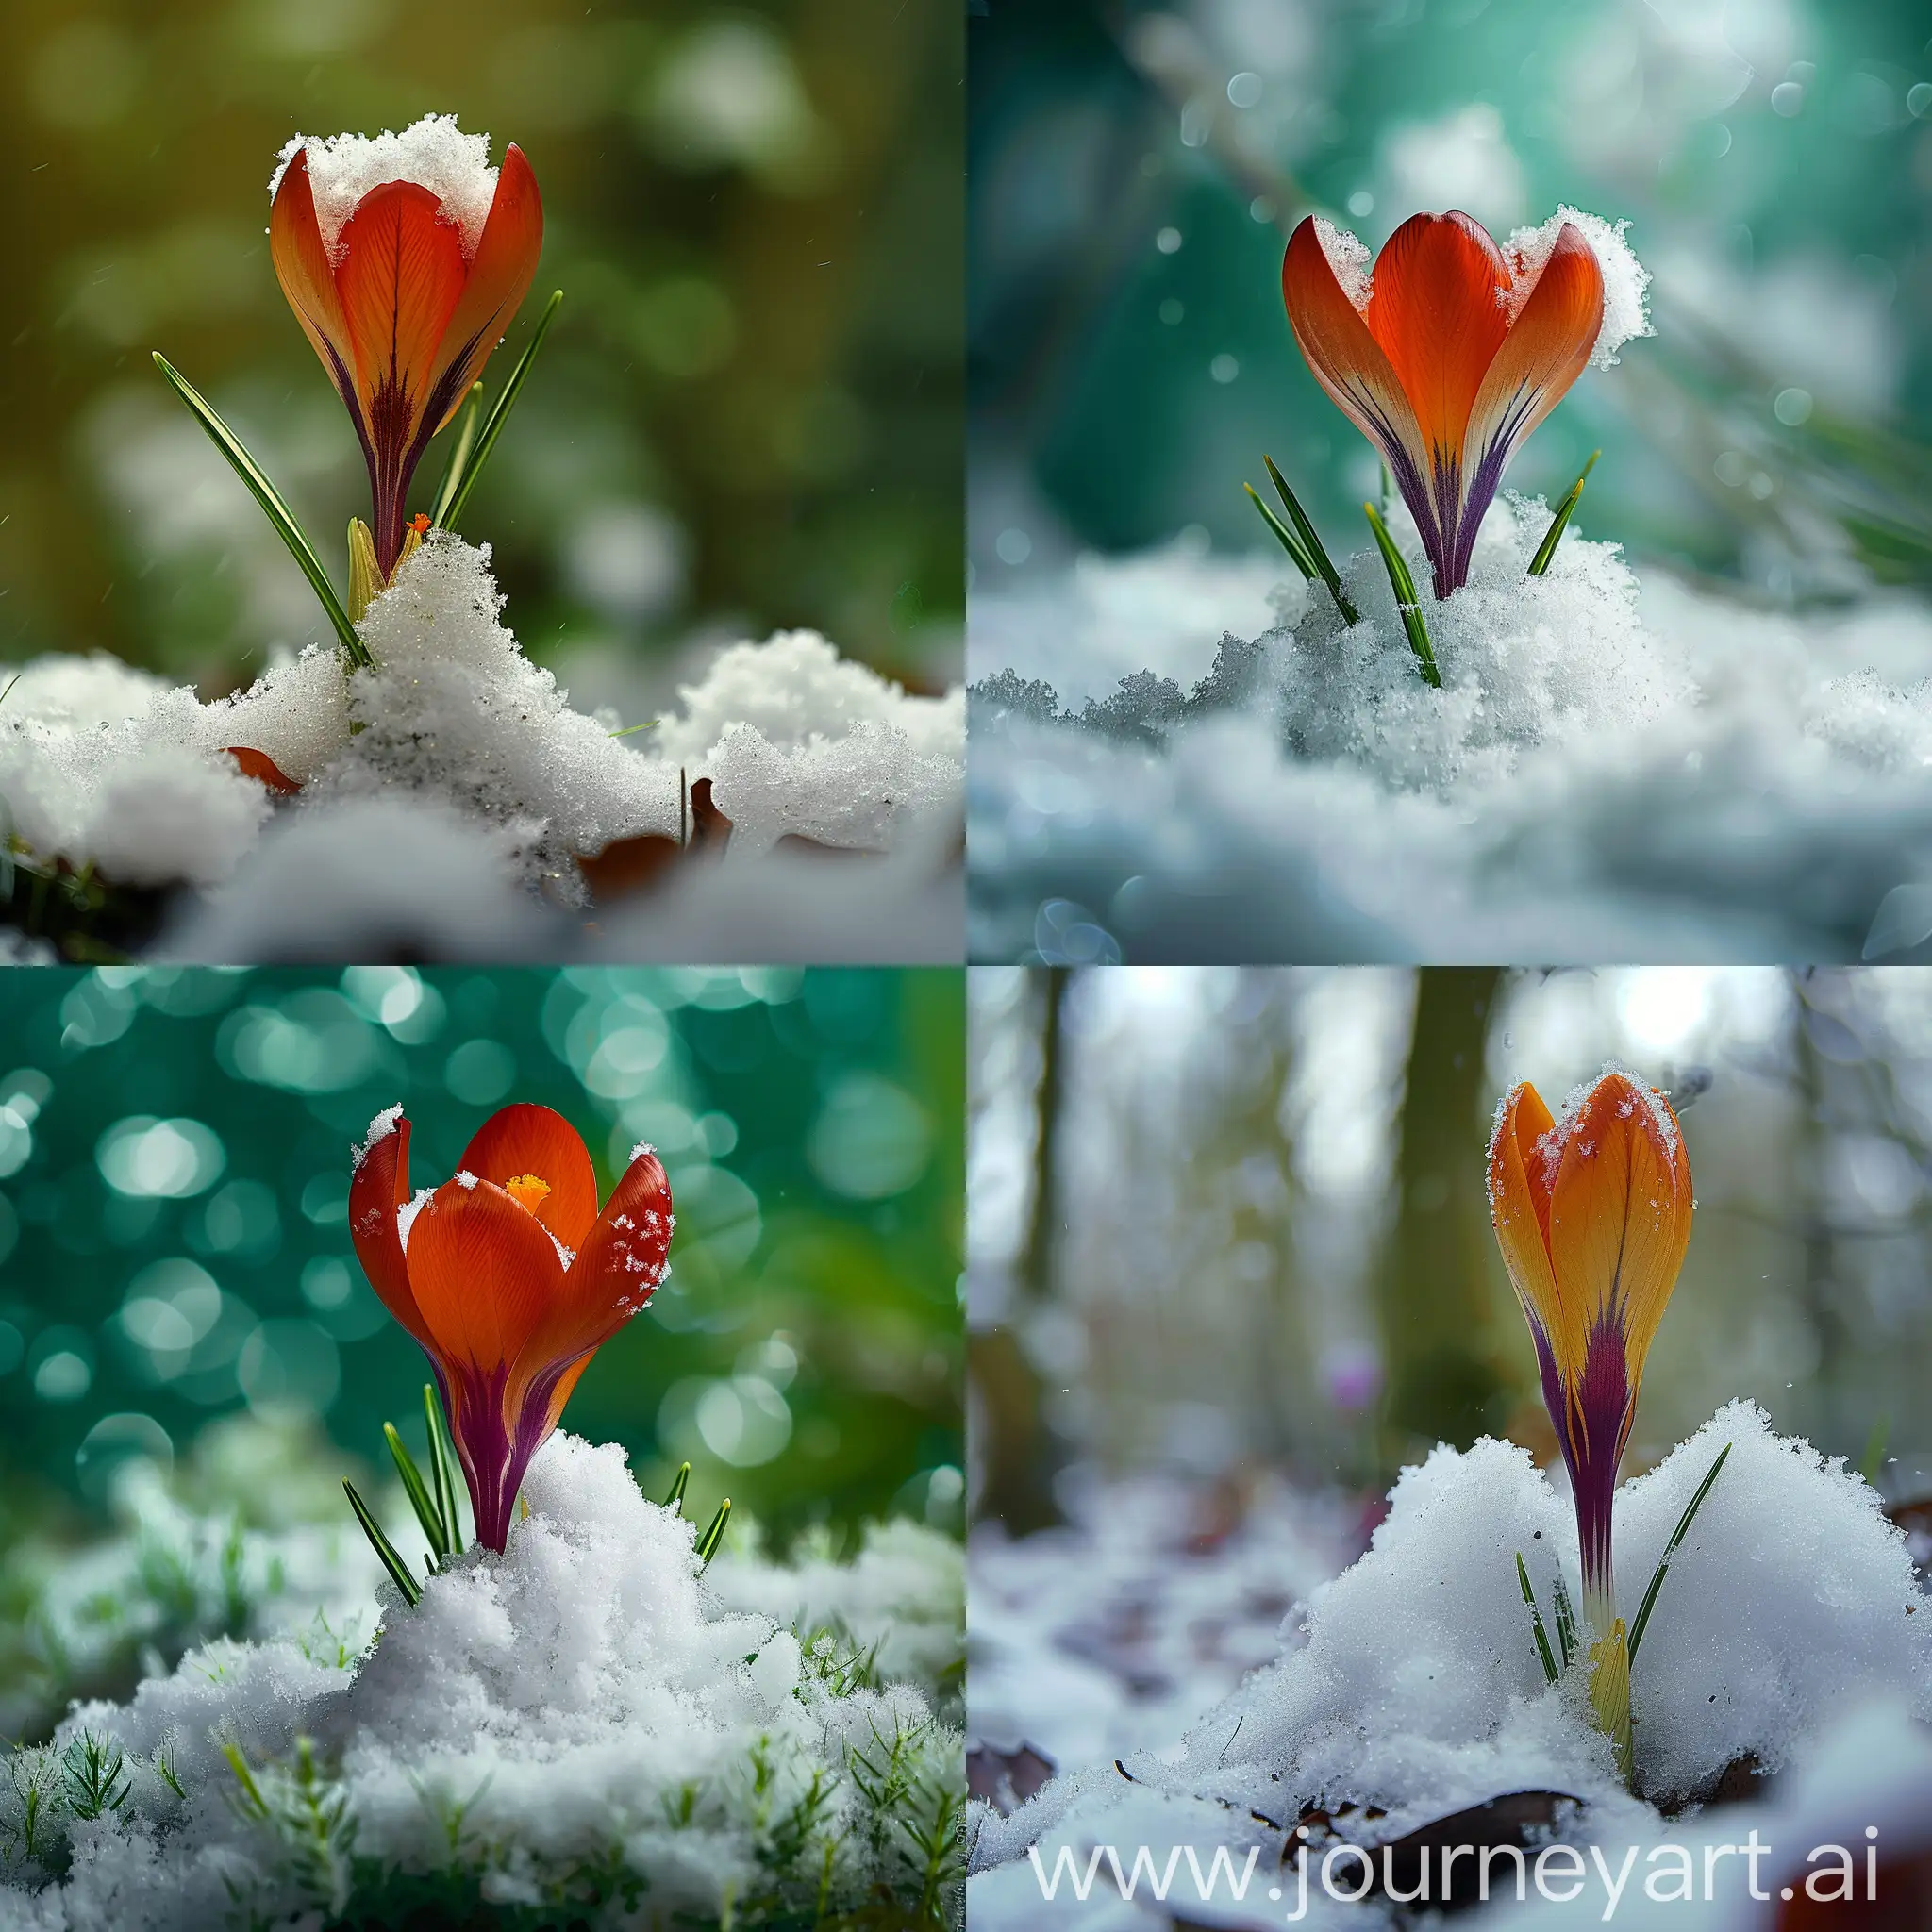 Emerald-Forest-Winter-Scene-with-Bordeaux-Crocus-in-Snow